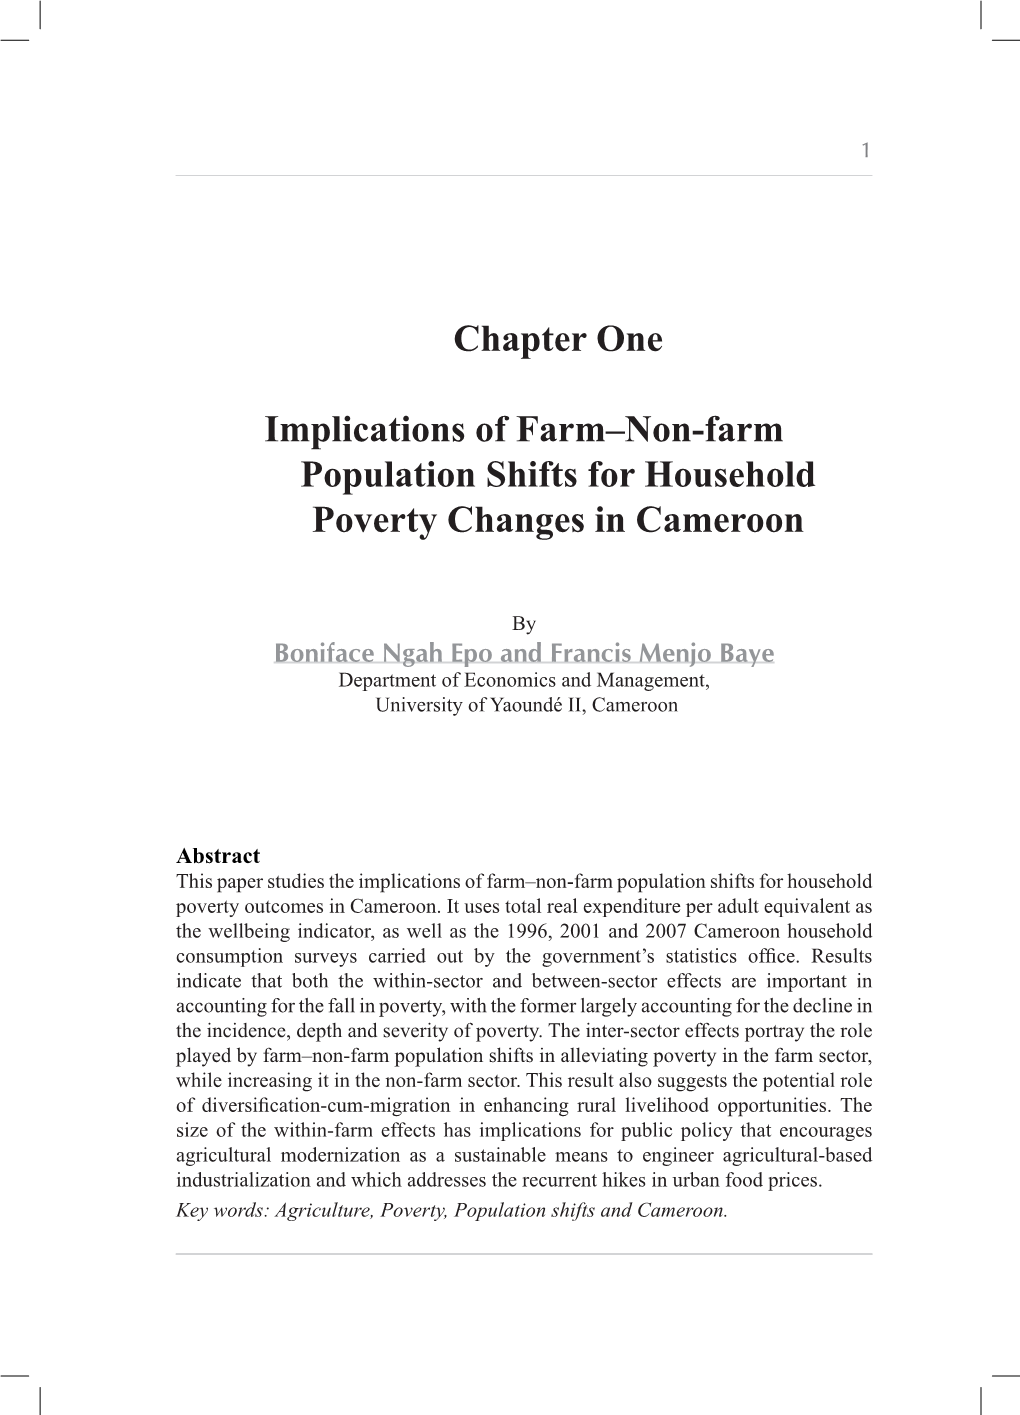 Chapter One Implications of Farm–Non-Farm Population Shifts for Household Poverty Changes in Cameroon